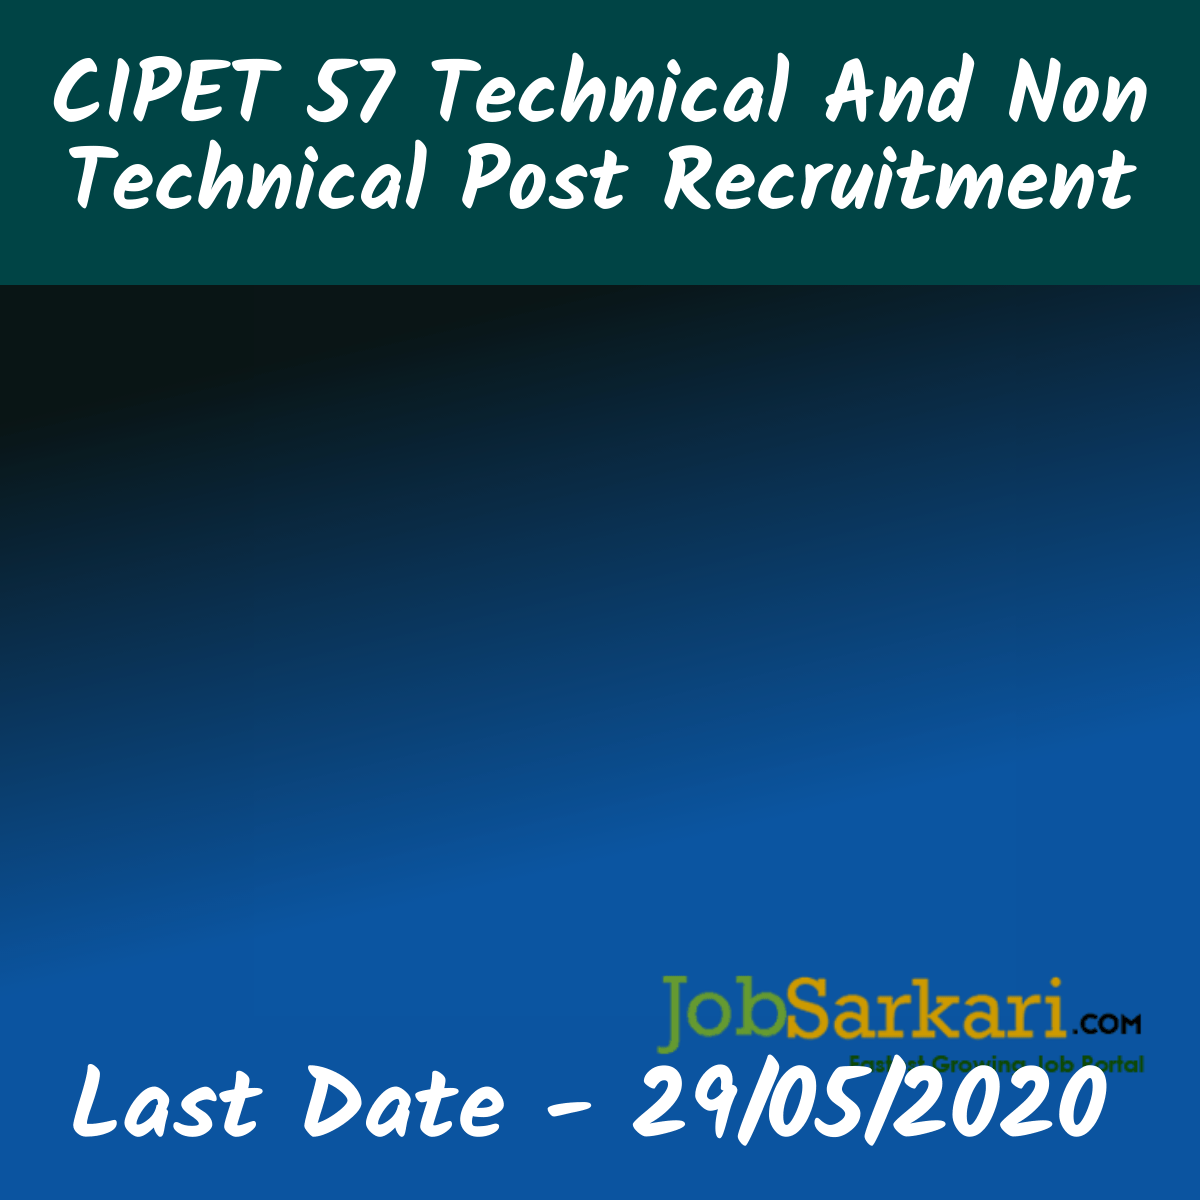 CIPET Recruitment 2020 For Technical And Non Technical Post 1